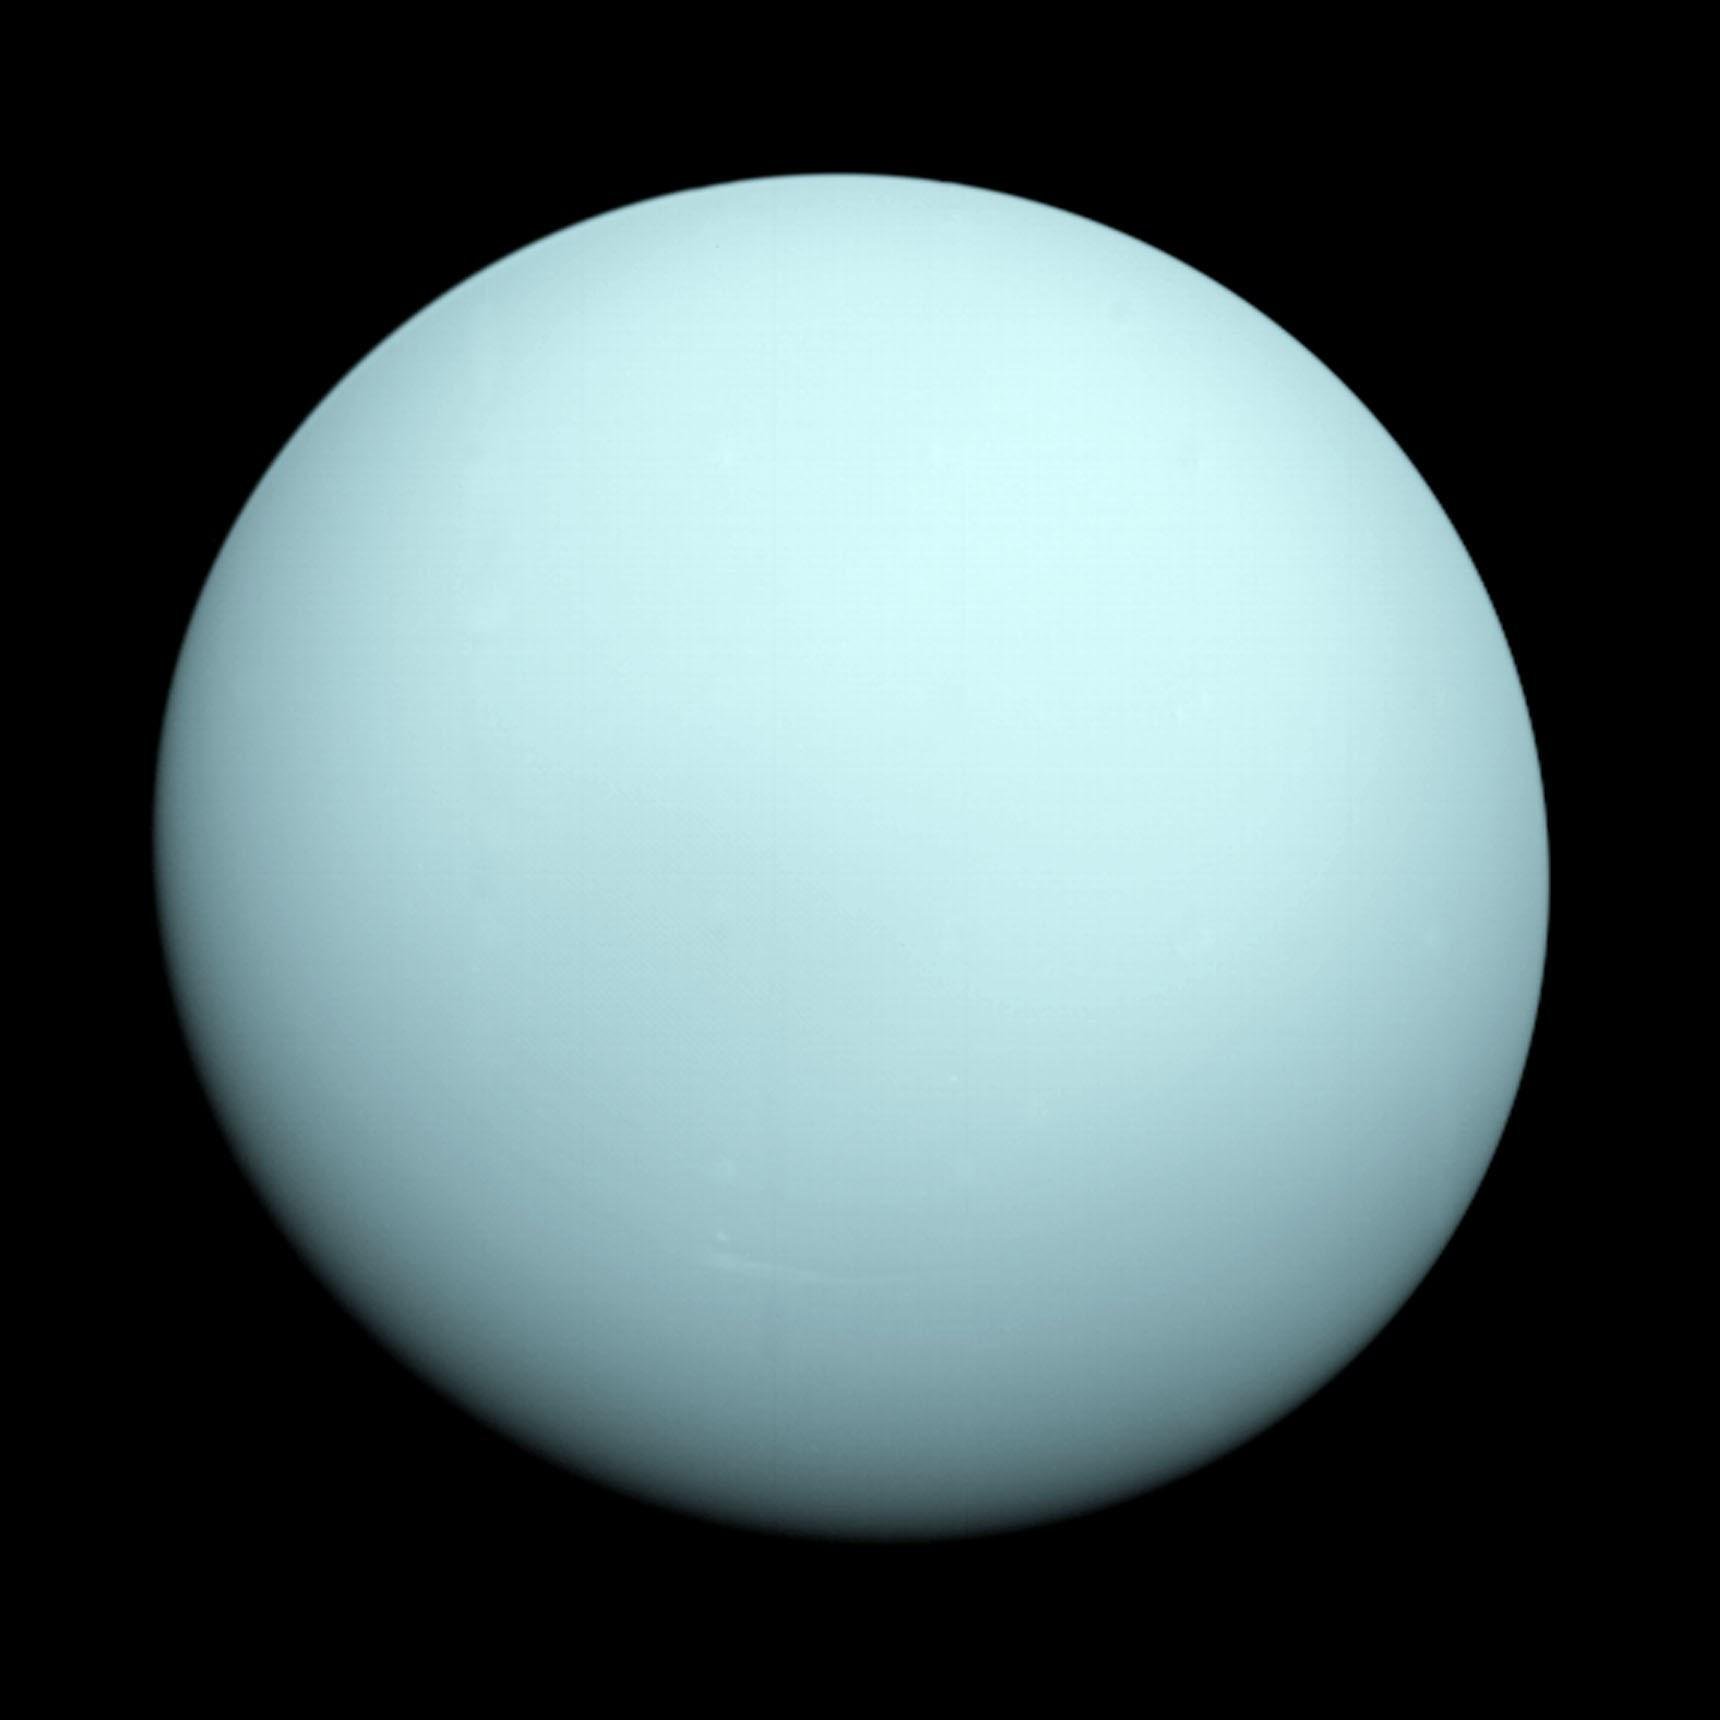 A view of Uranus from NASA's Voyager 2 spacecraft. The blue planet looks hazy with no discernable details.